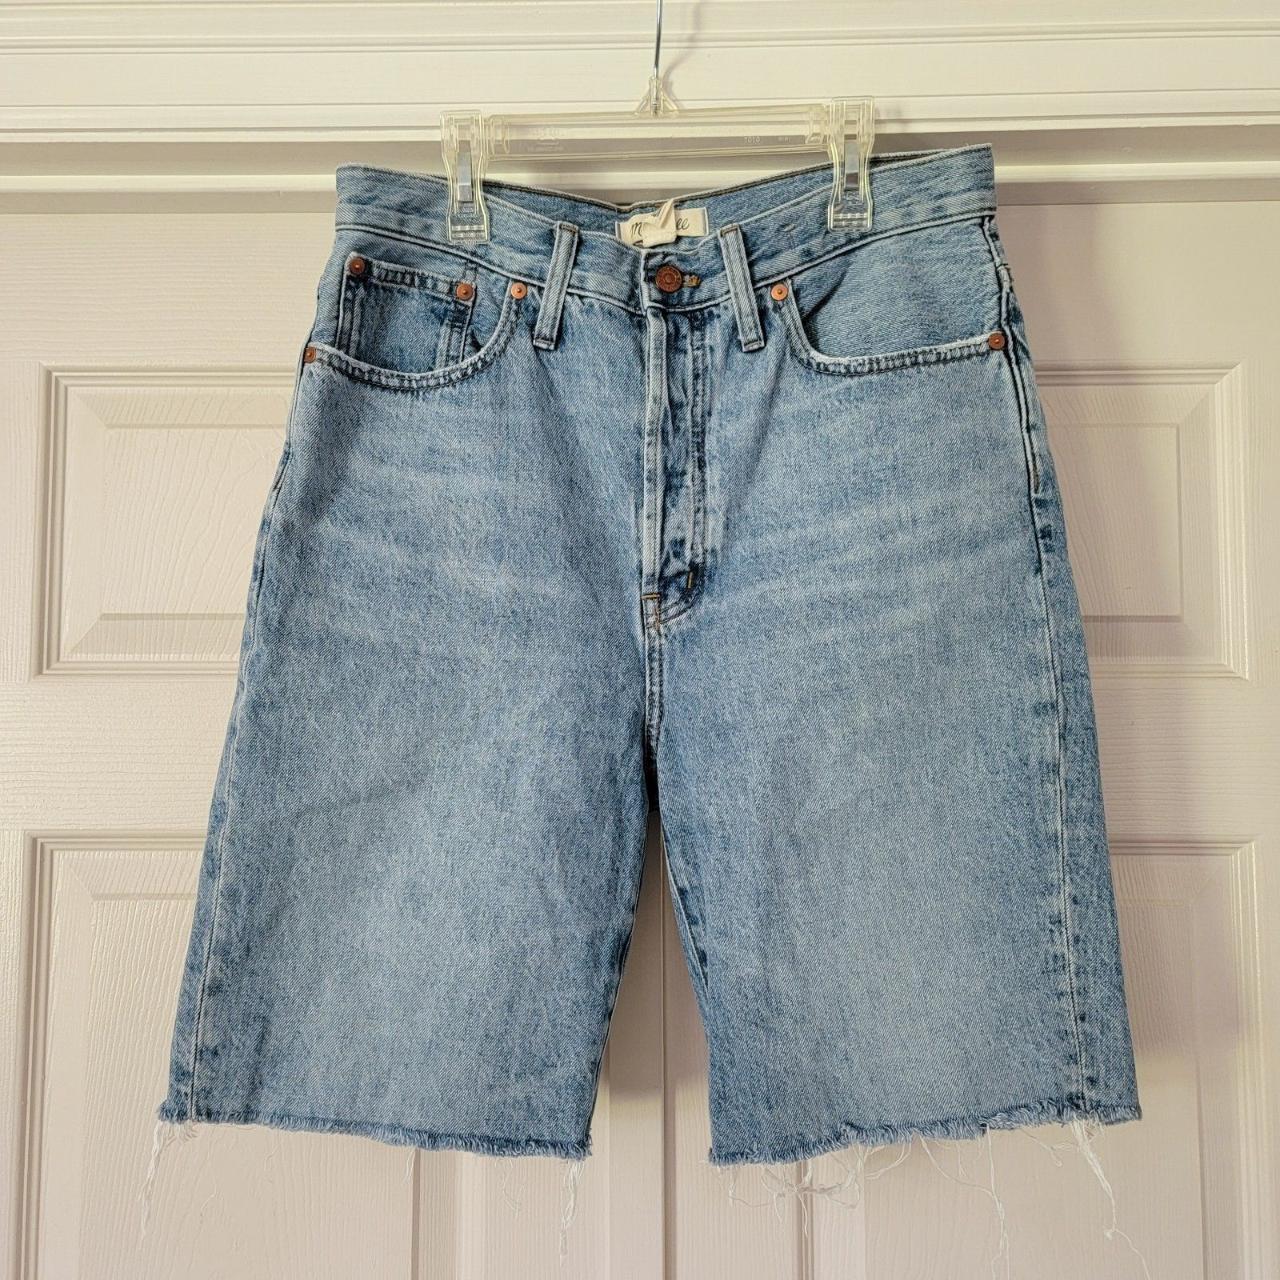 High-Rise Long Denim Shorts in Brightwater Wash Size... - Depop